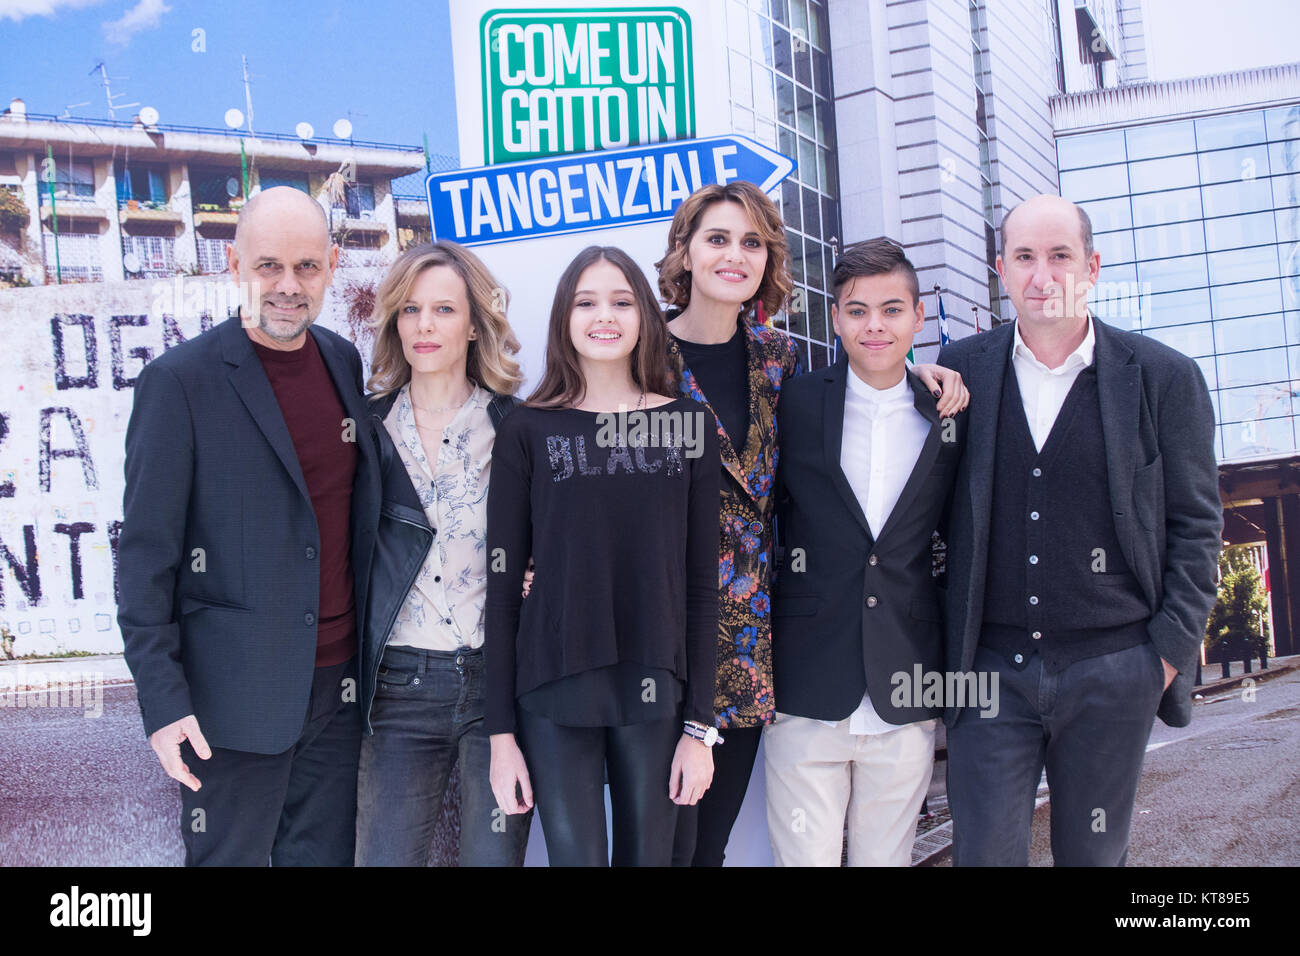 Rome, Italy. 22nd Dec, 2017. Cast during Photocall of the Italian film "Come  un Gatto in Tangenziale" during the photocall of the Italian film "Come un  Gatto in Tangenziale". Credit: Matteo Nardone/Pacific